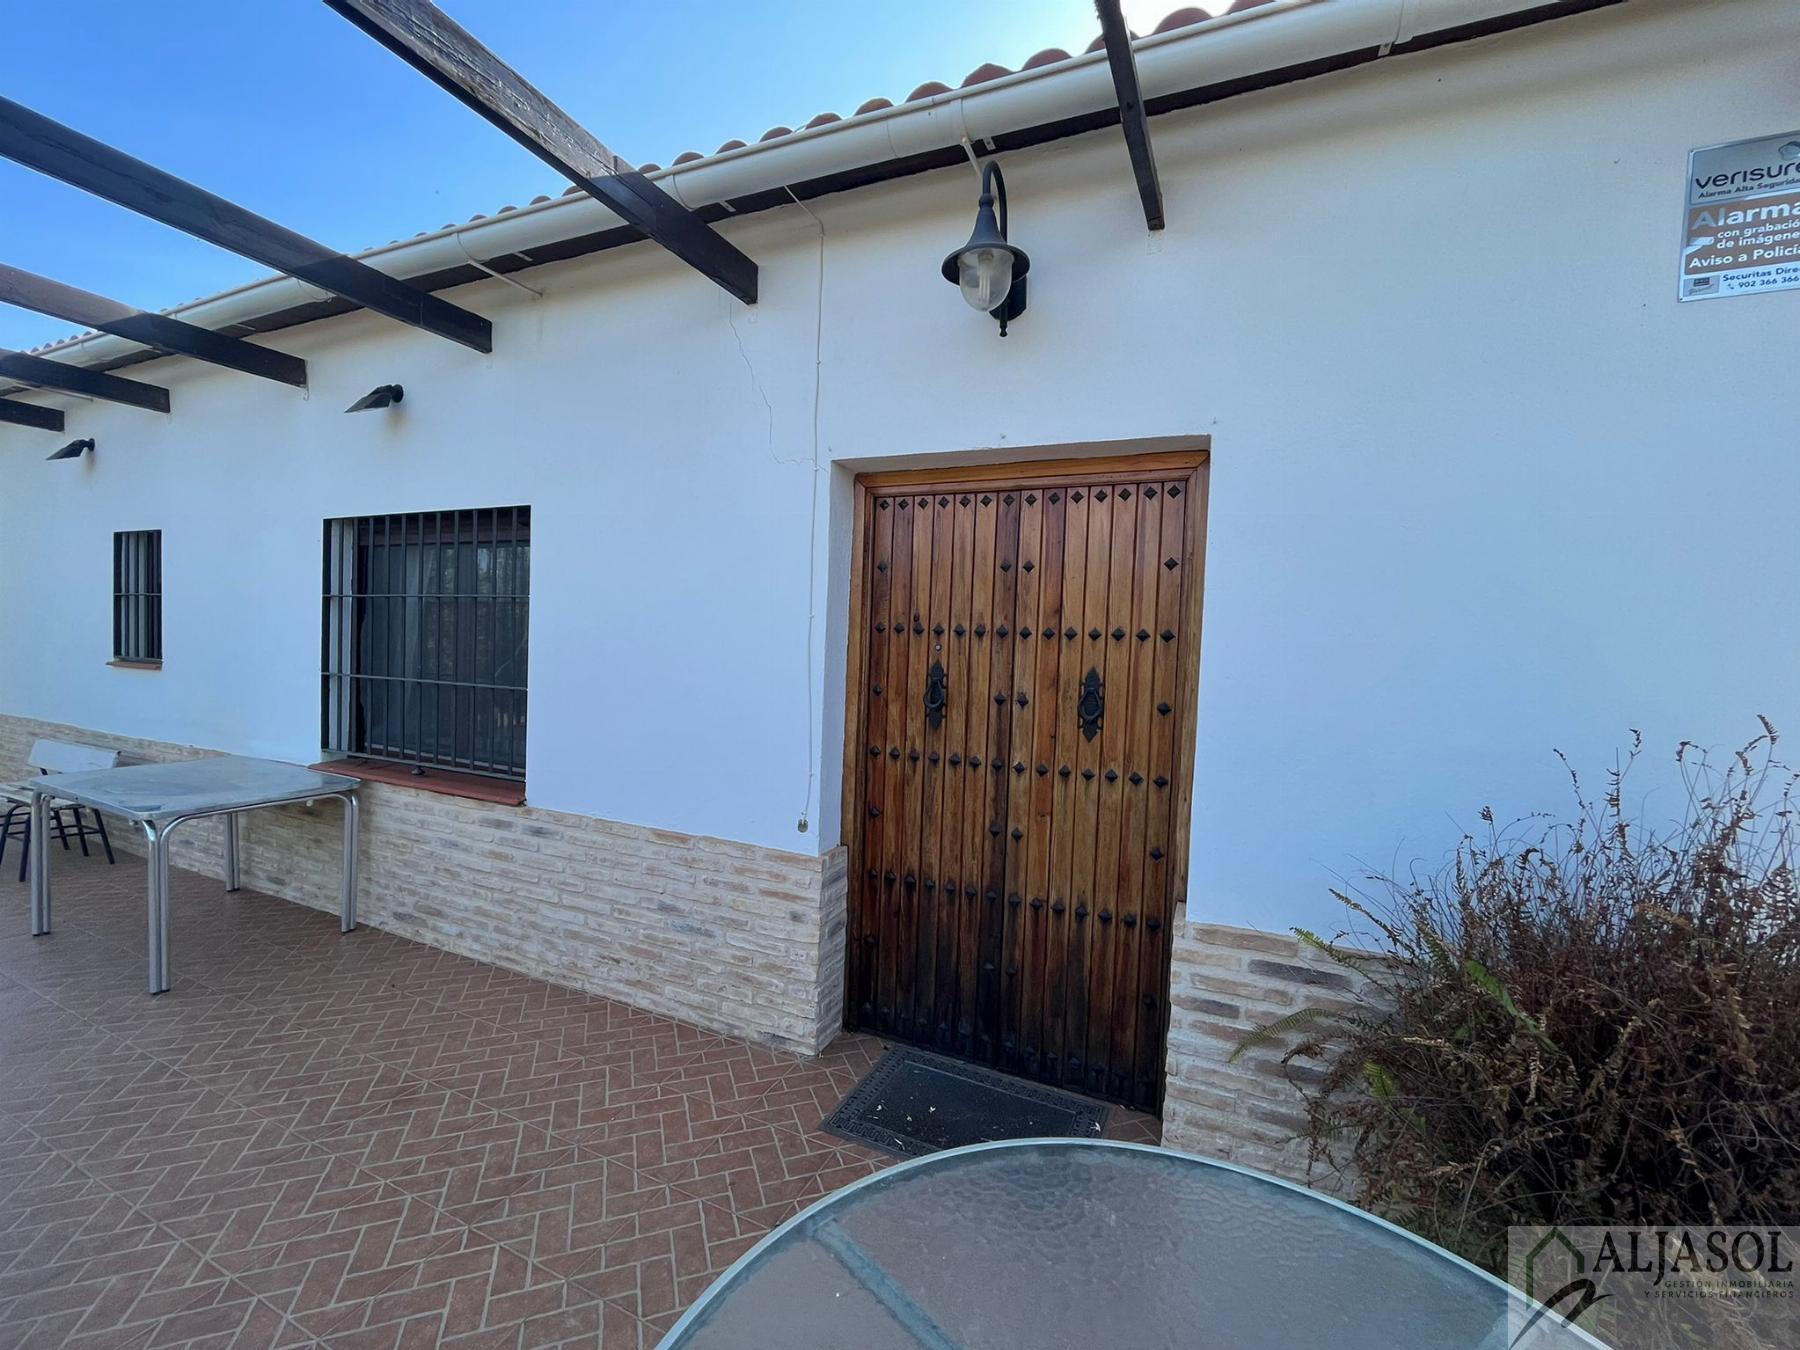 For sale of rural property in Umbrete